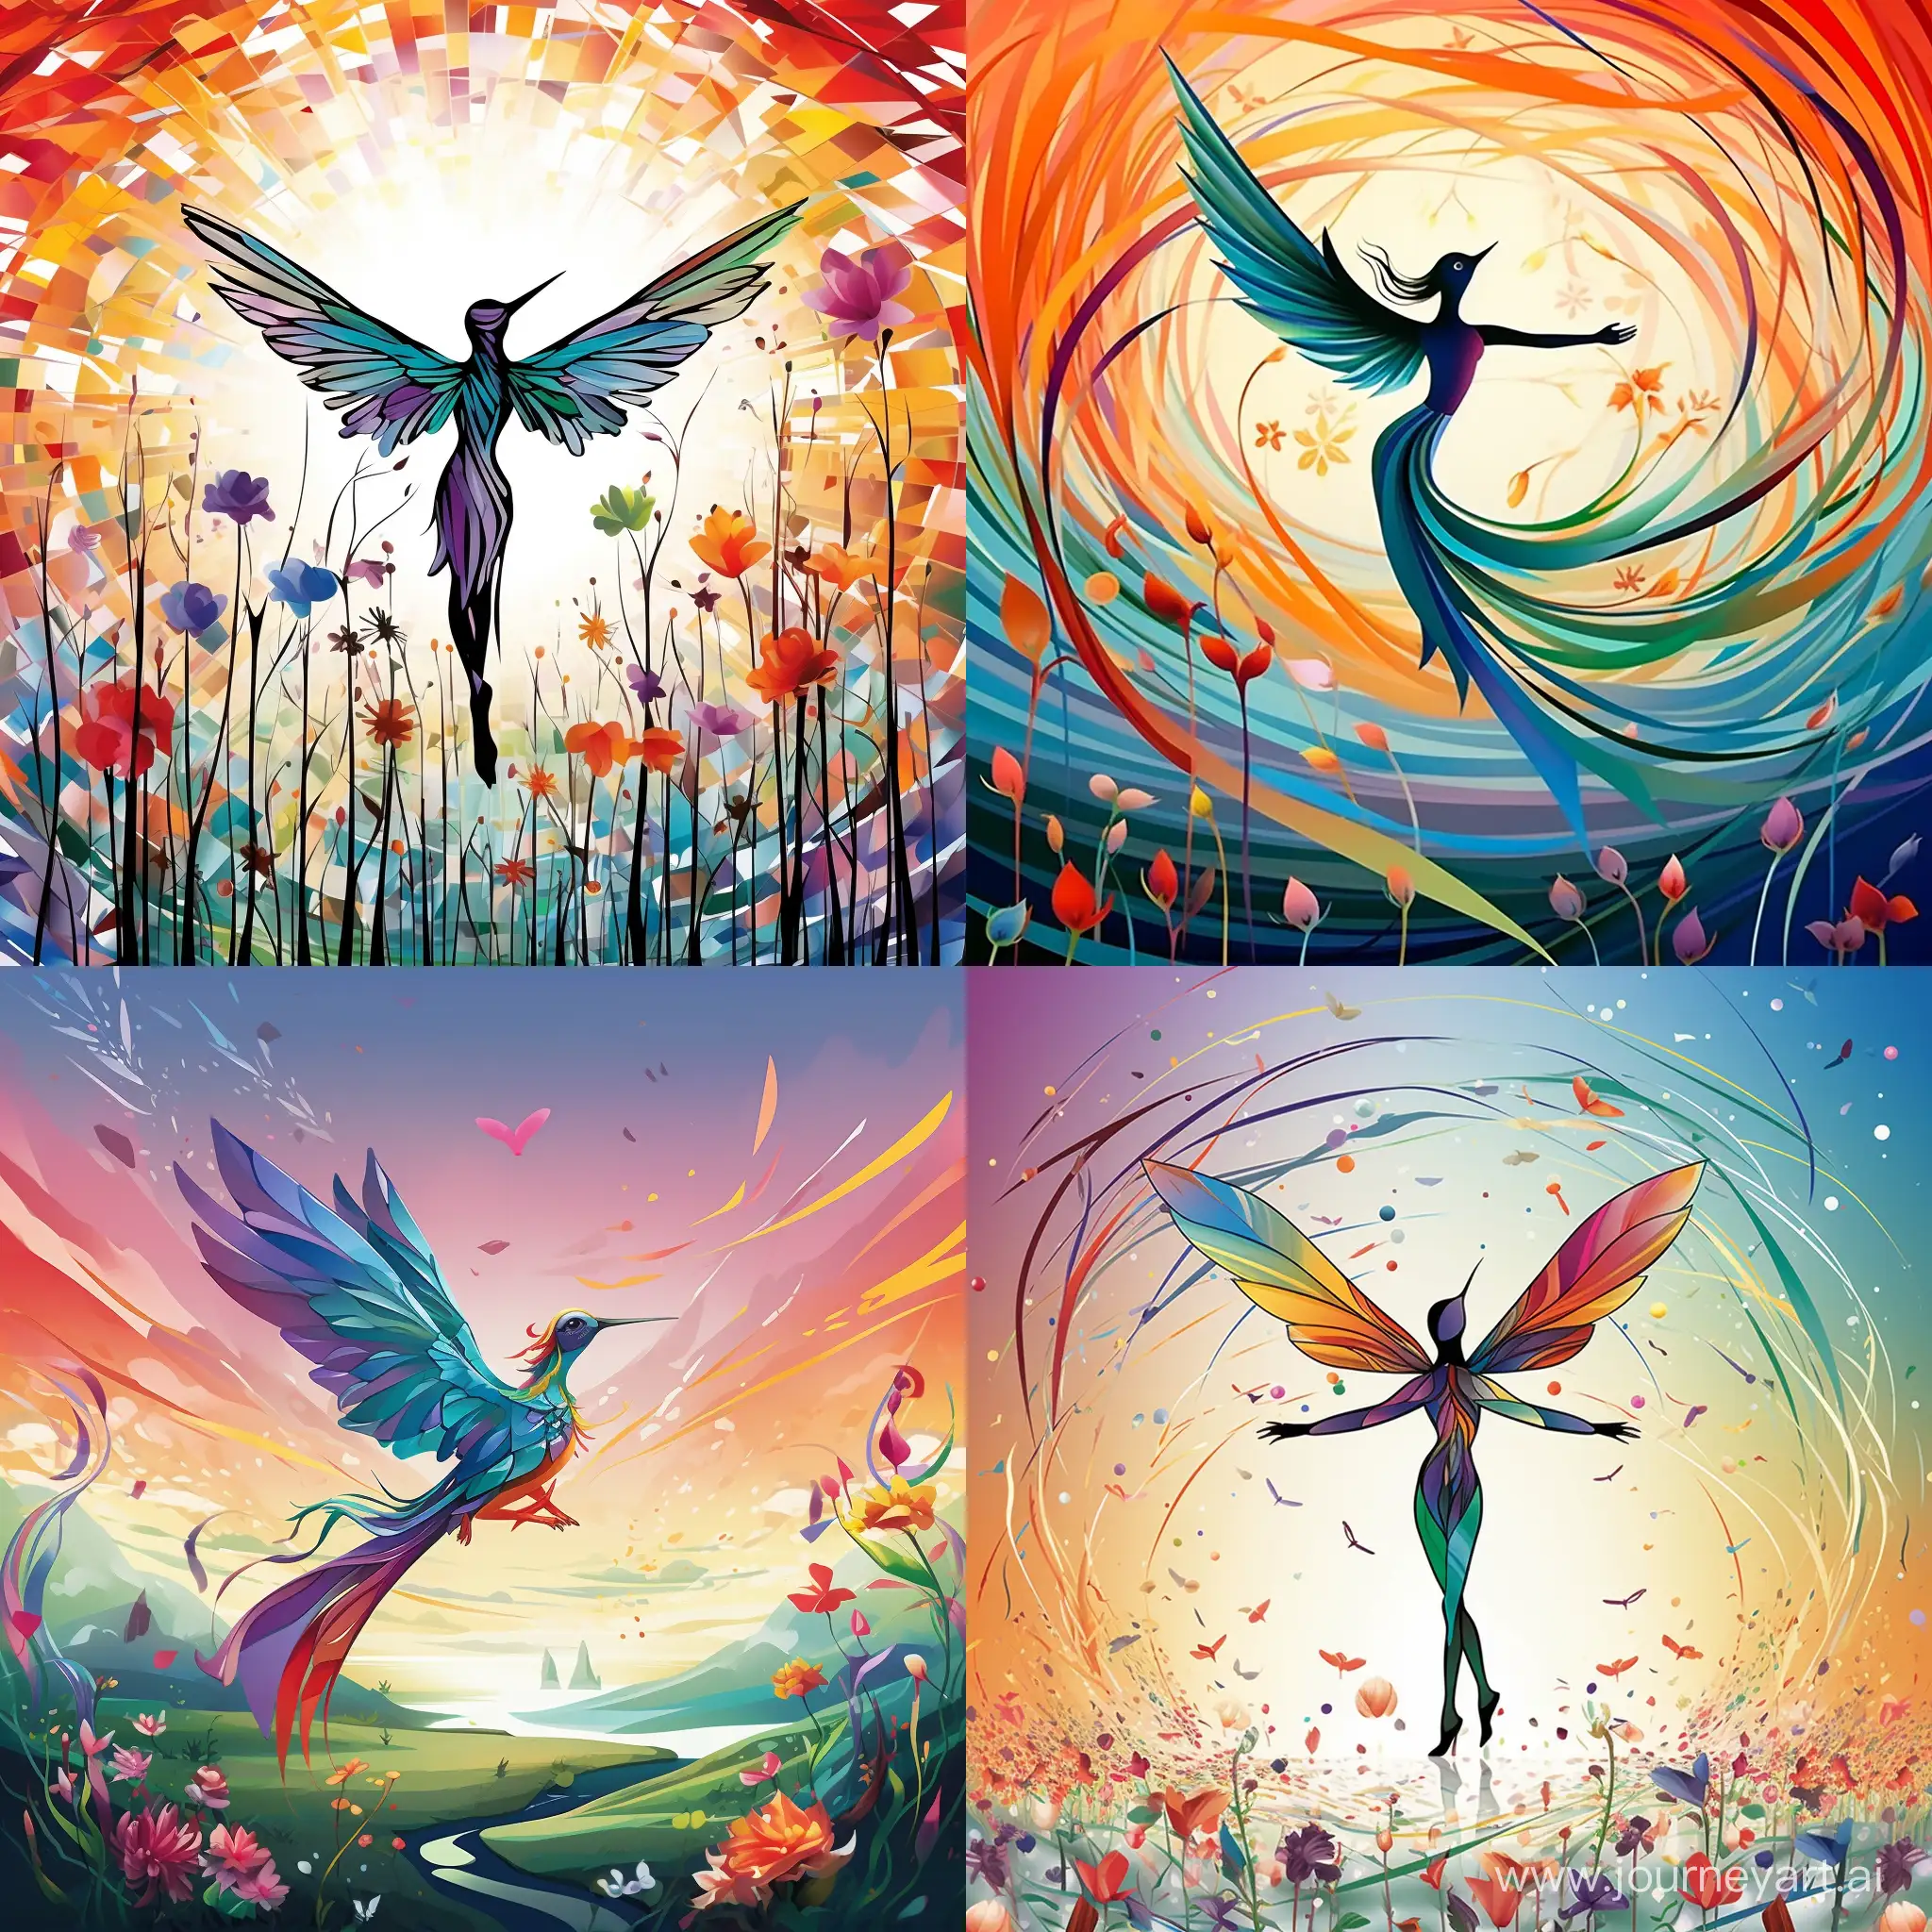 color, Simple image, simple line, with hummingbird, Full body, Full figure, flying pose, blades, kinetic waves that look like cuts, with power of wings as sharp as blades, wings of blades, cutting effect, small compared to the whole image , colorful, meadow background, fantasy style, d